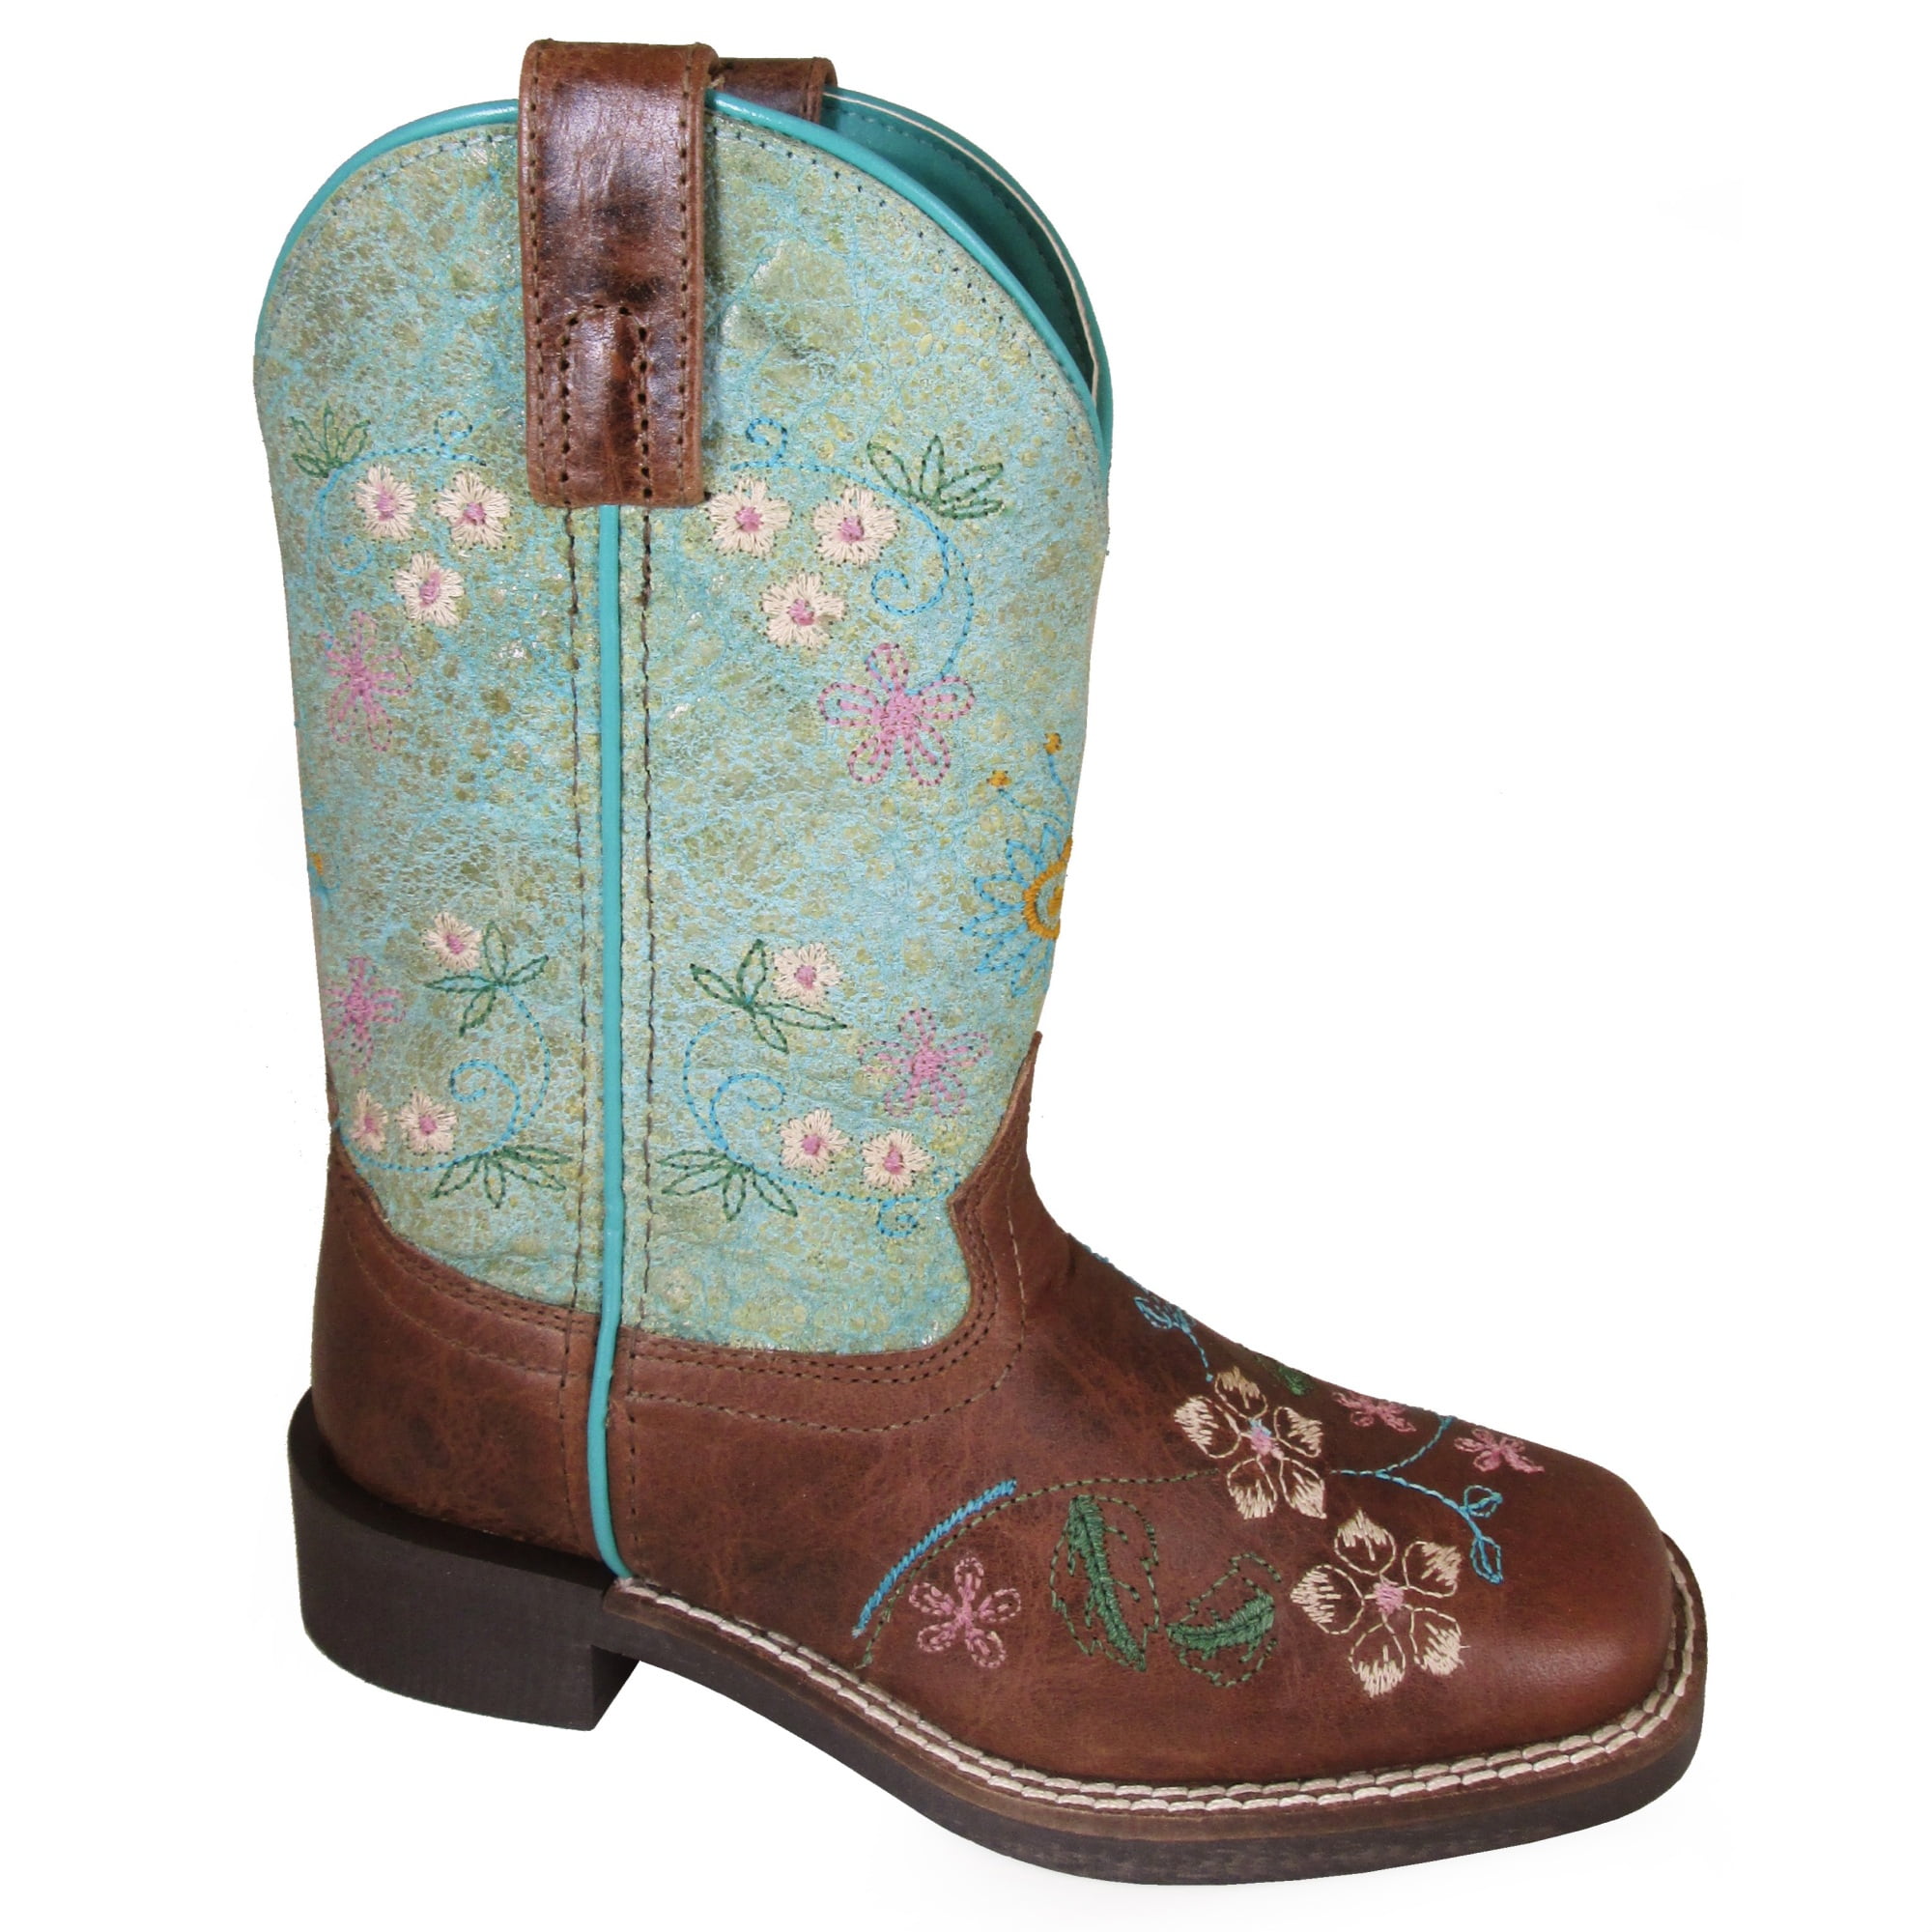 Smoky Mountain Childrens Monterey Boots Brown/Blue